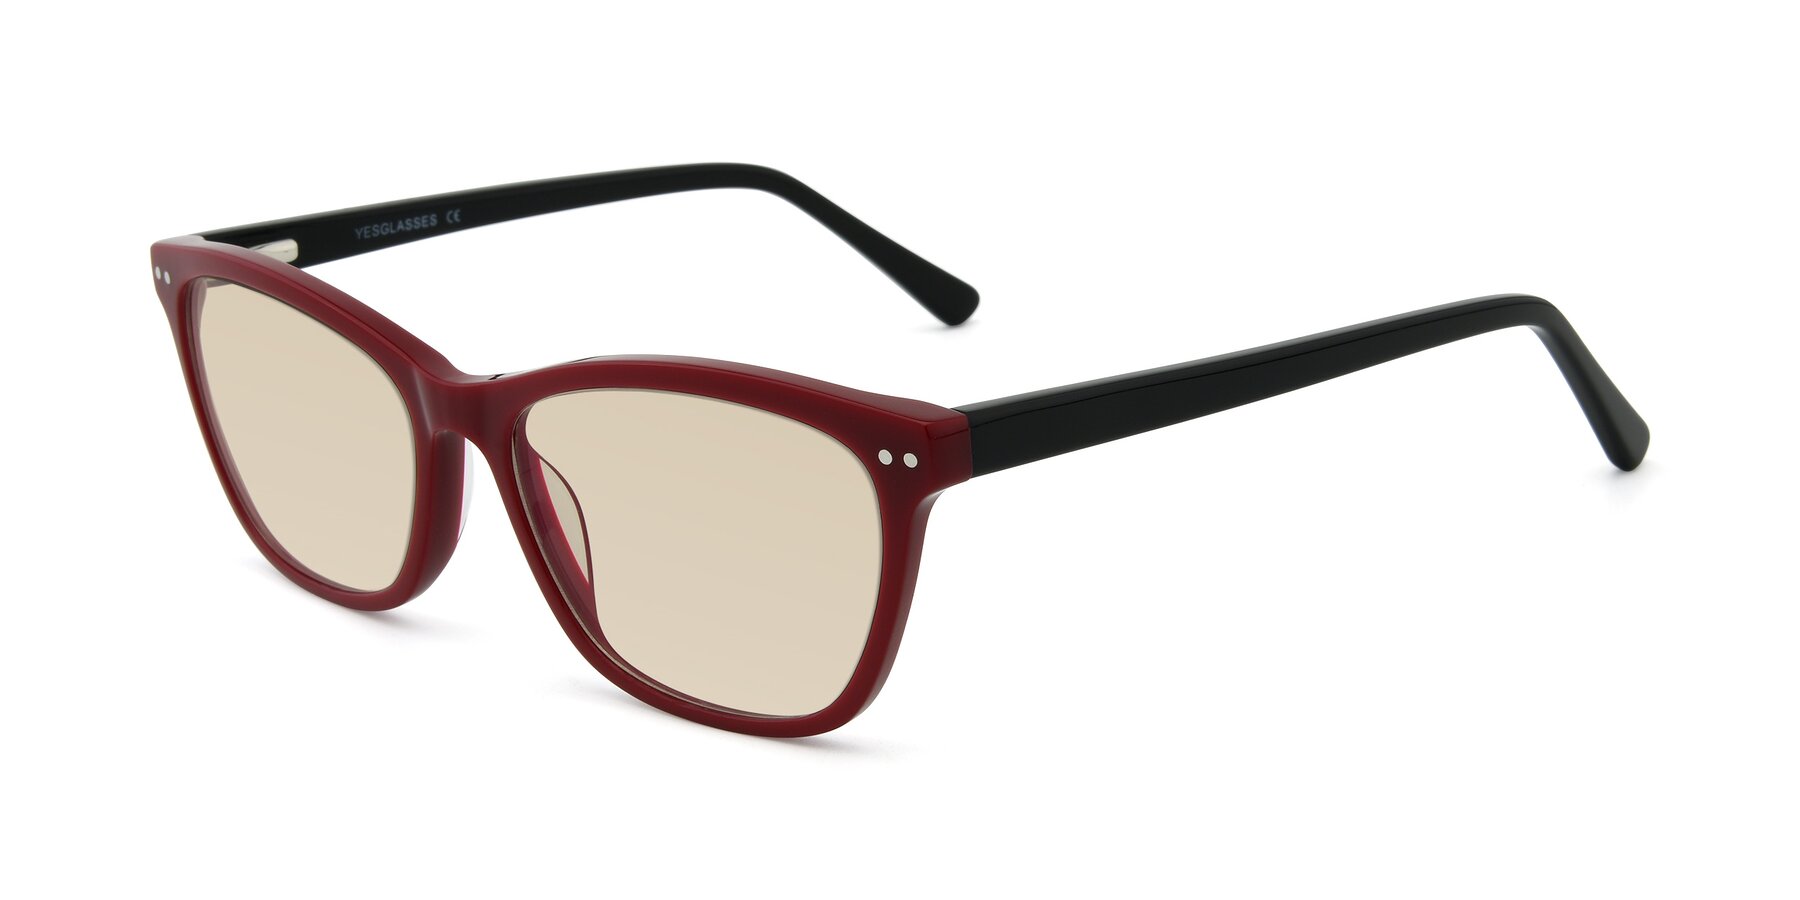 Angle of 17350 in Wine with Light Brown Tinted Lenses